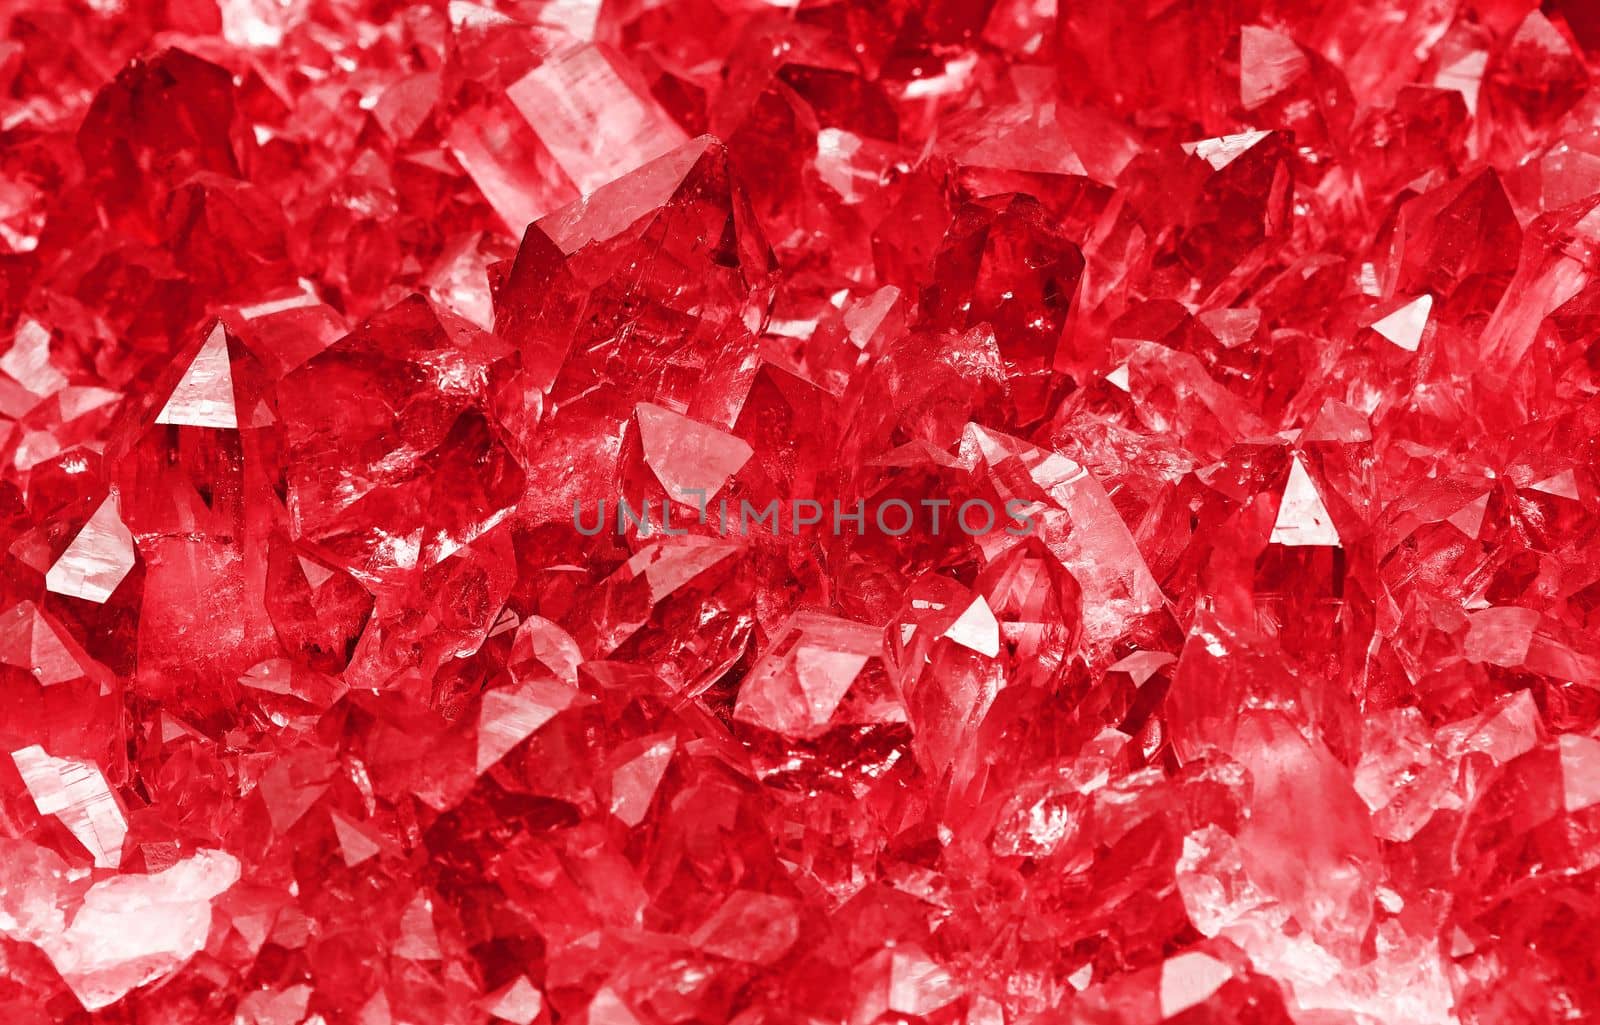 Cluster of ruby red quartz mineral crystals by BreakingTheWalls